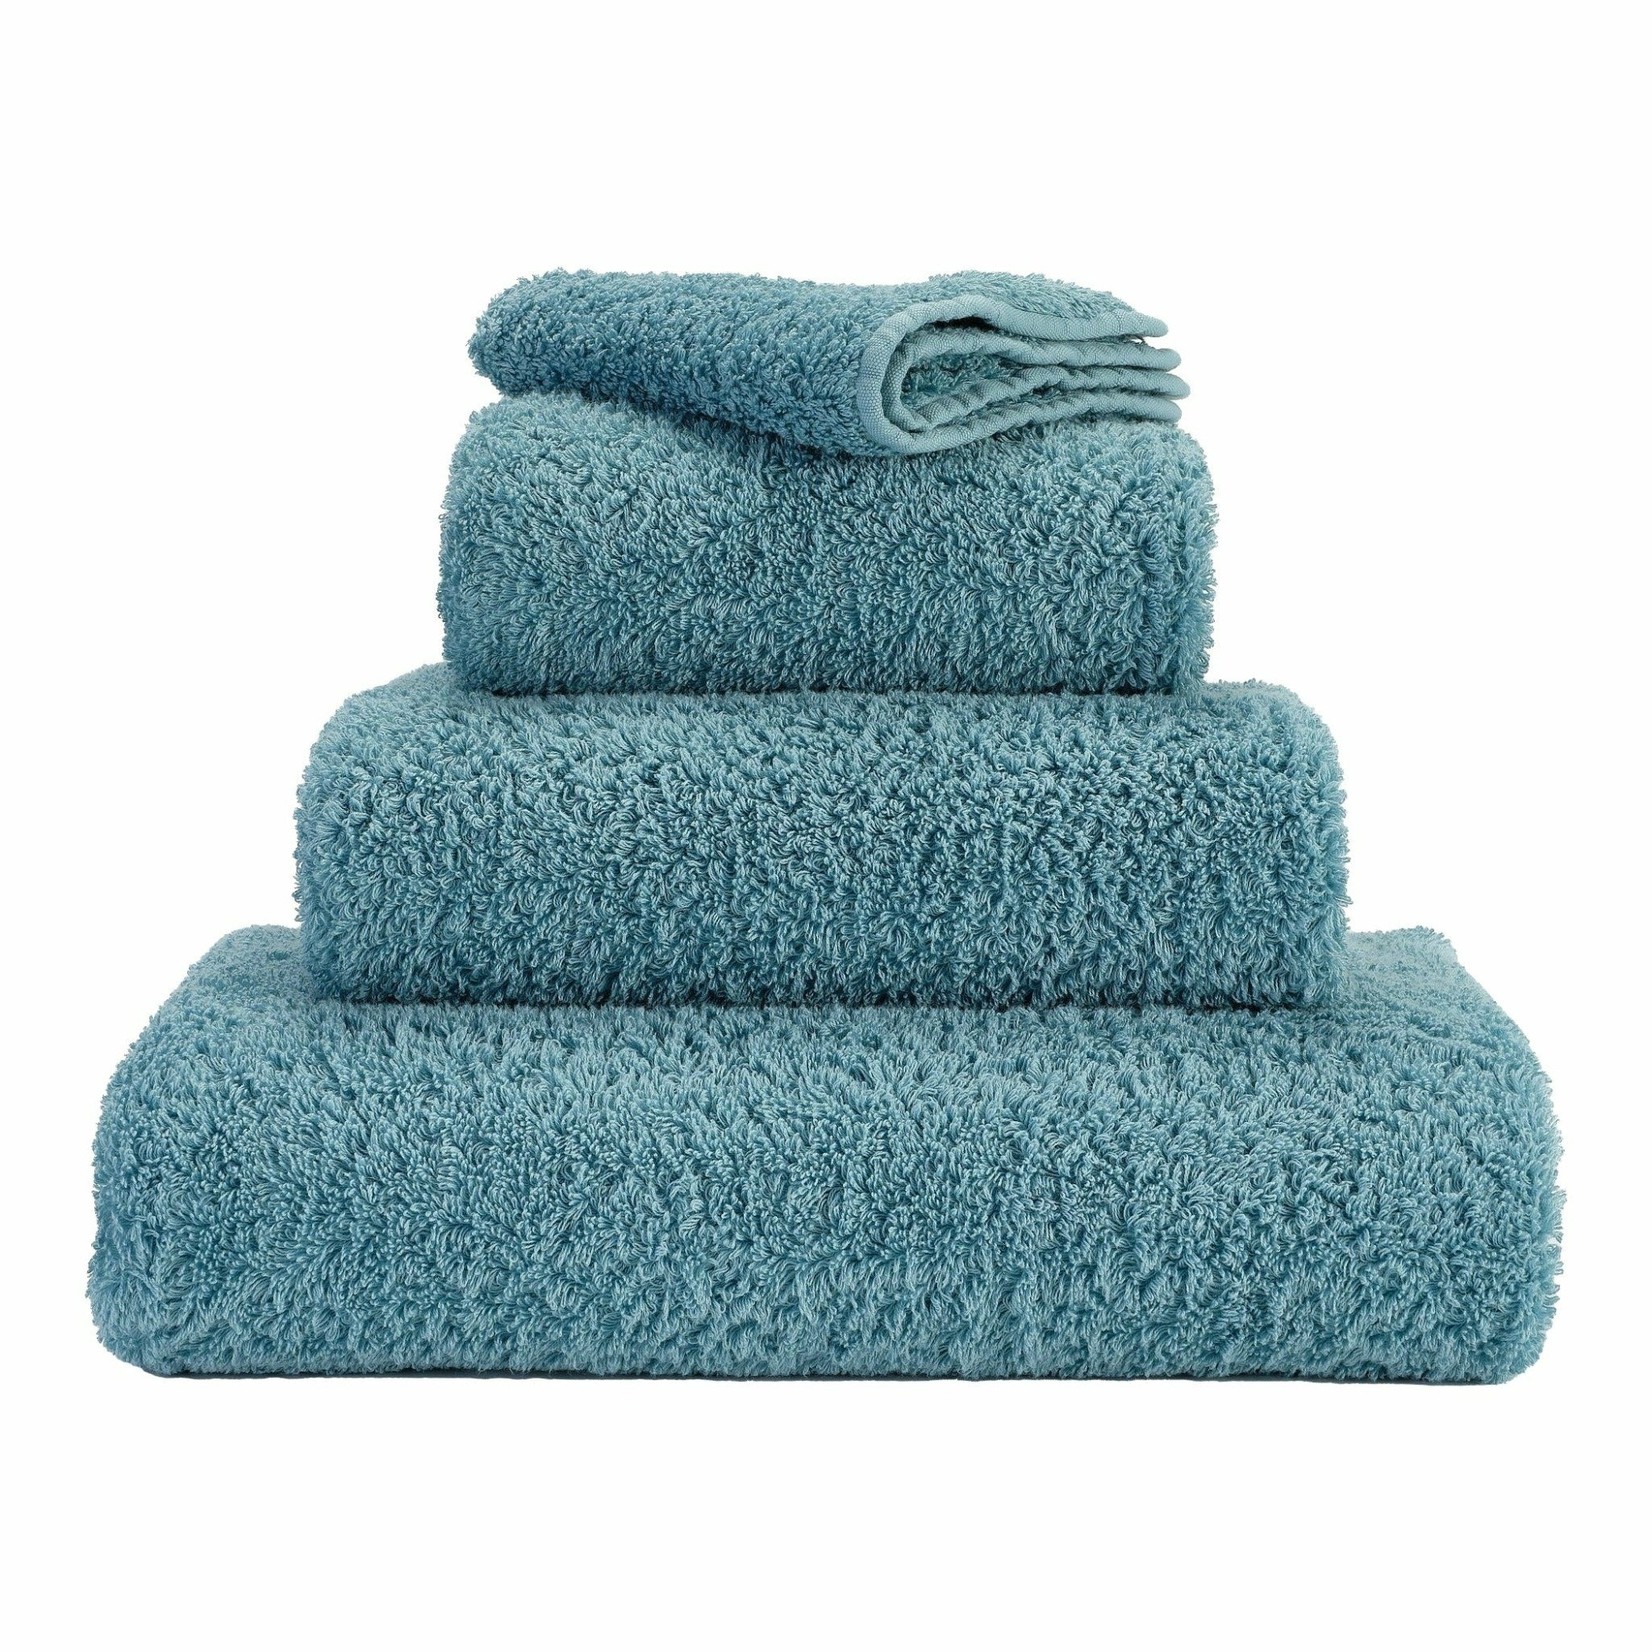 Abyss Abyss Super Pile Towels 309 Atlantic